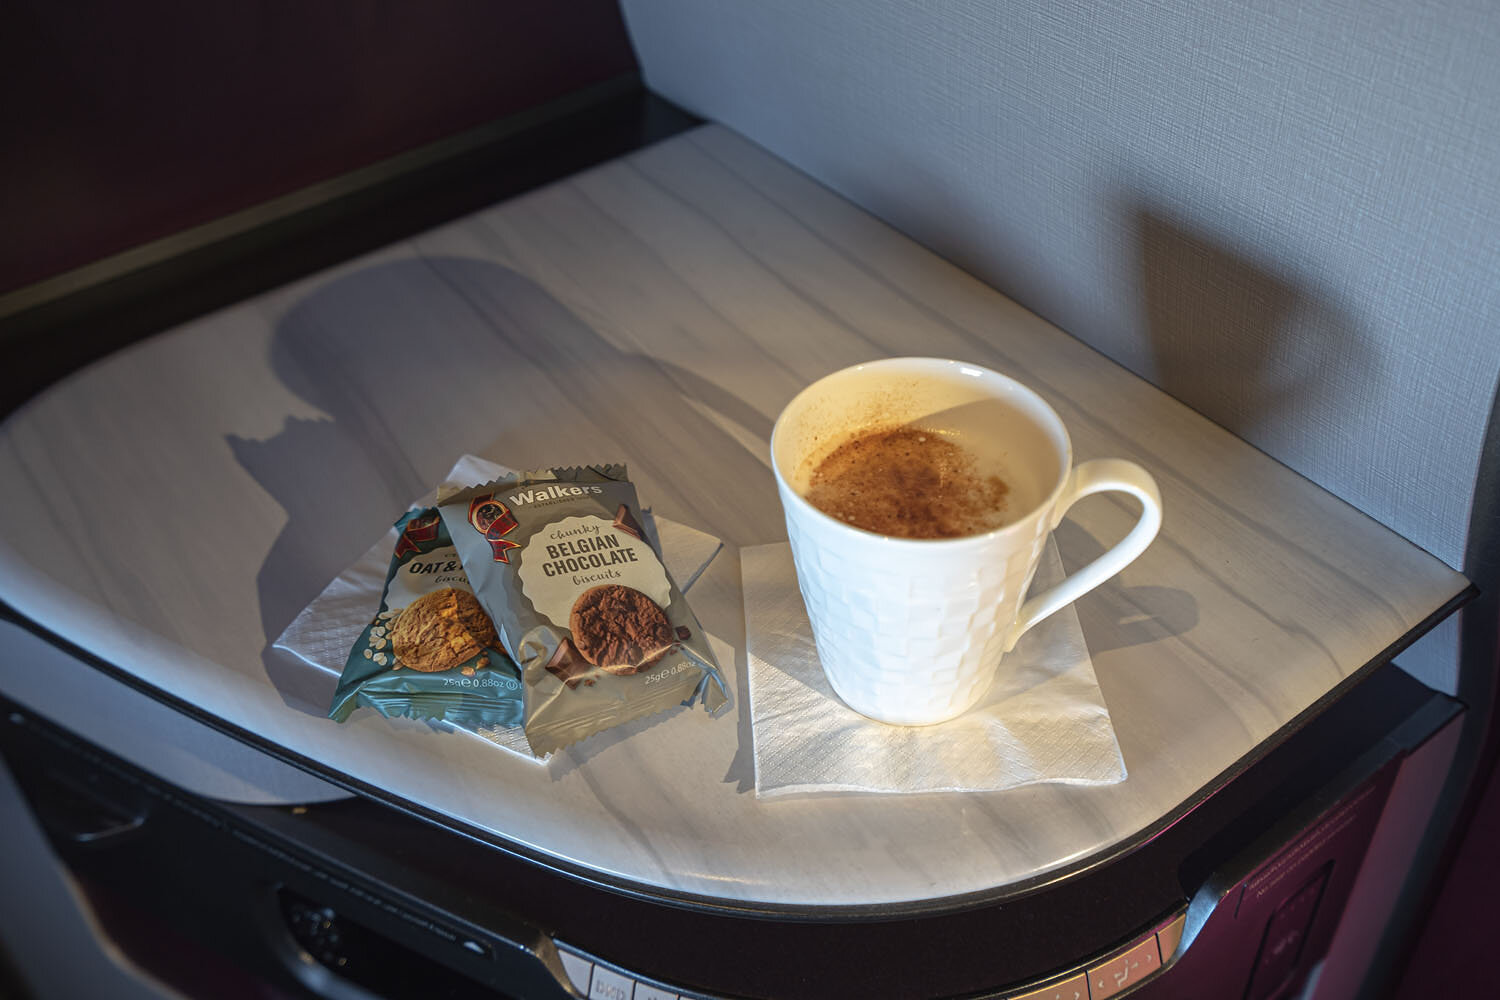 Biscuits and coffee before take off